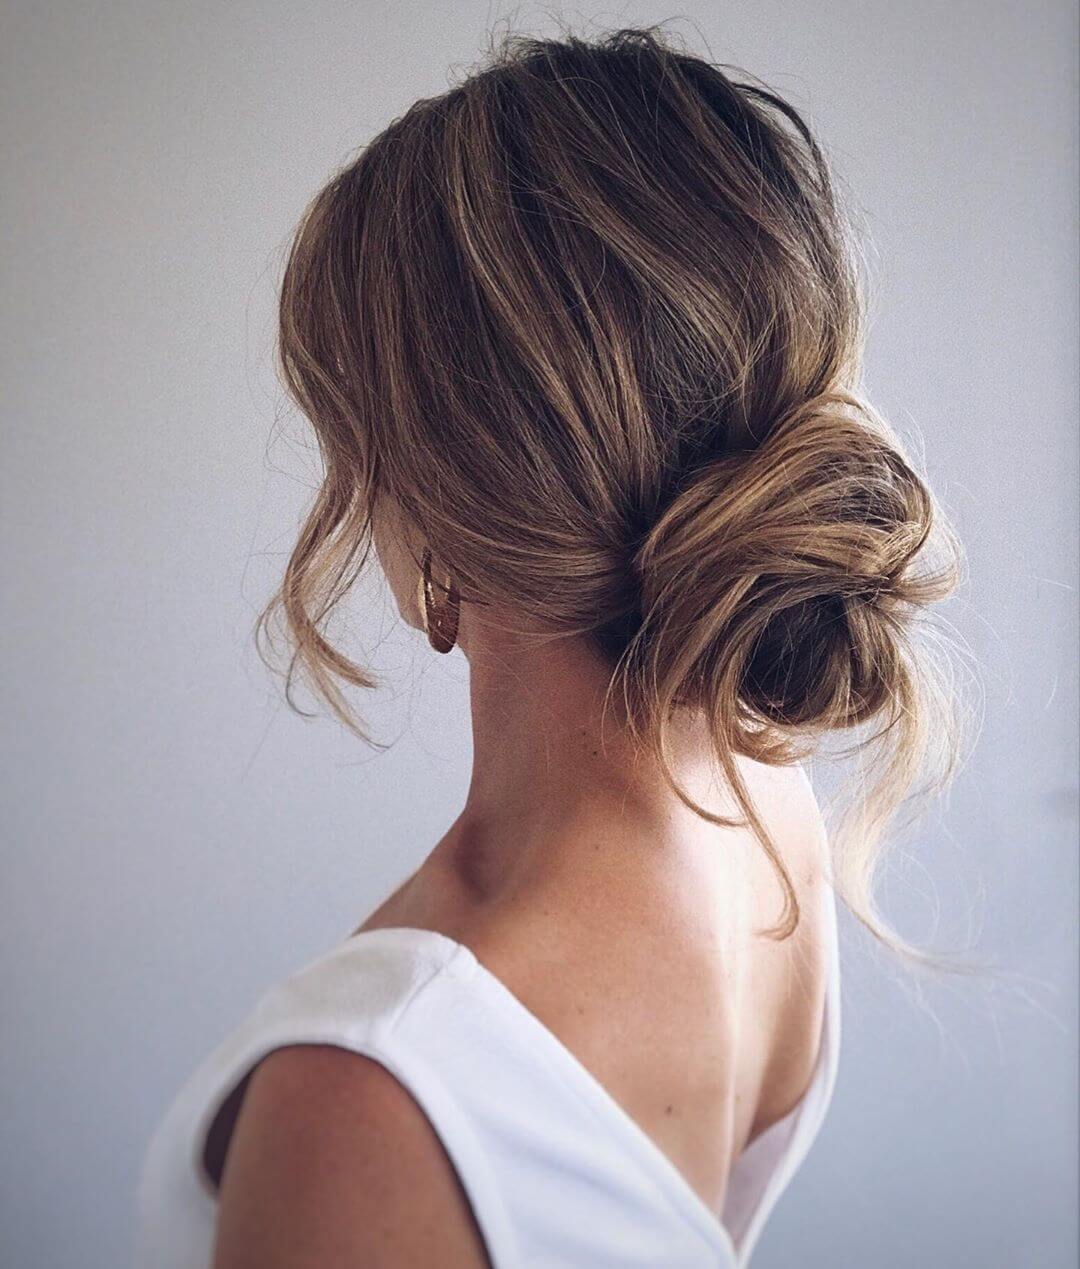 Messy Low Bun Romantic Hairstyles For Valentine's Day